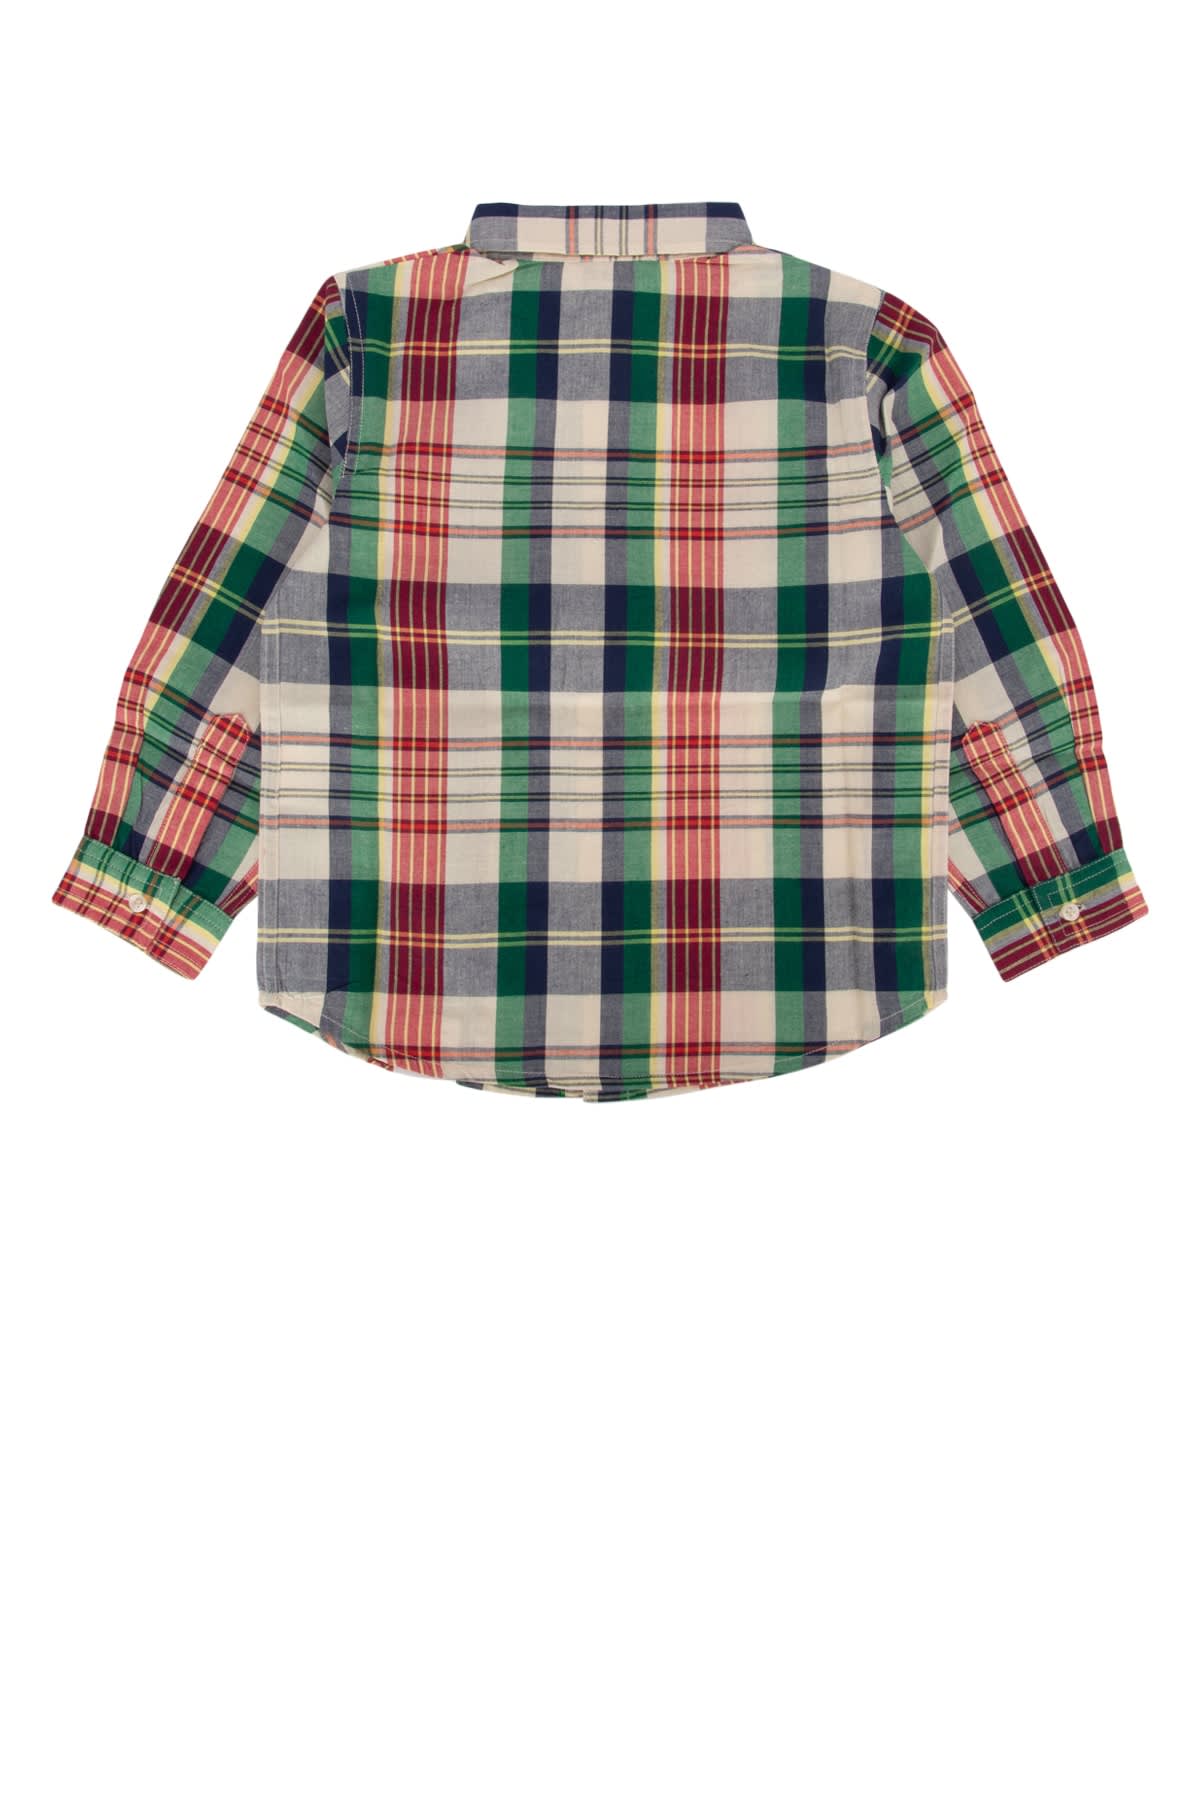 Bonpoint Kids' Camicia In Green